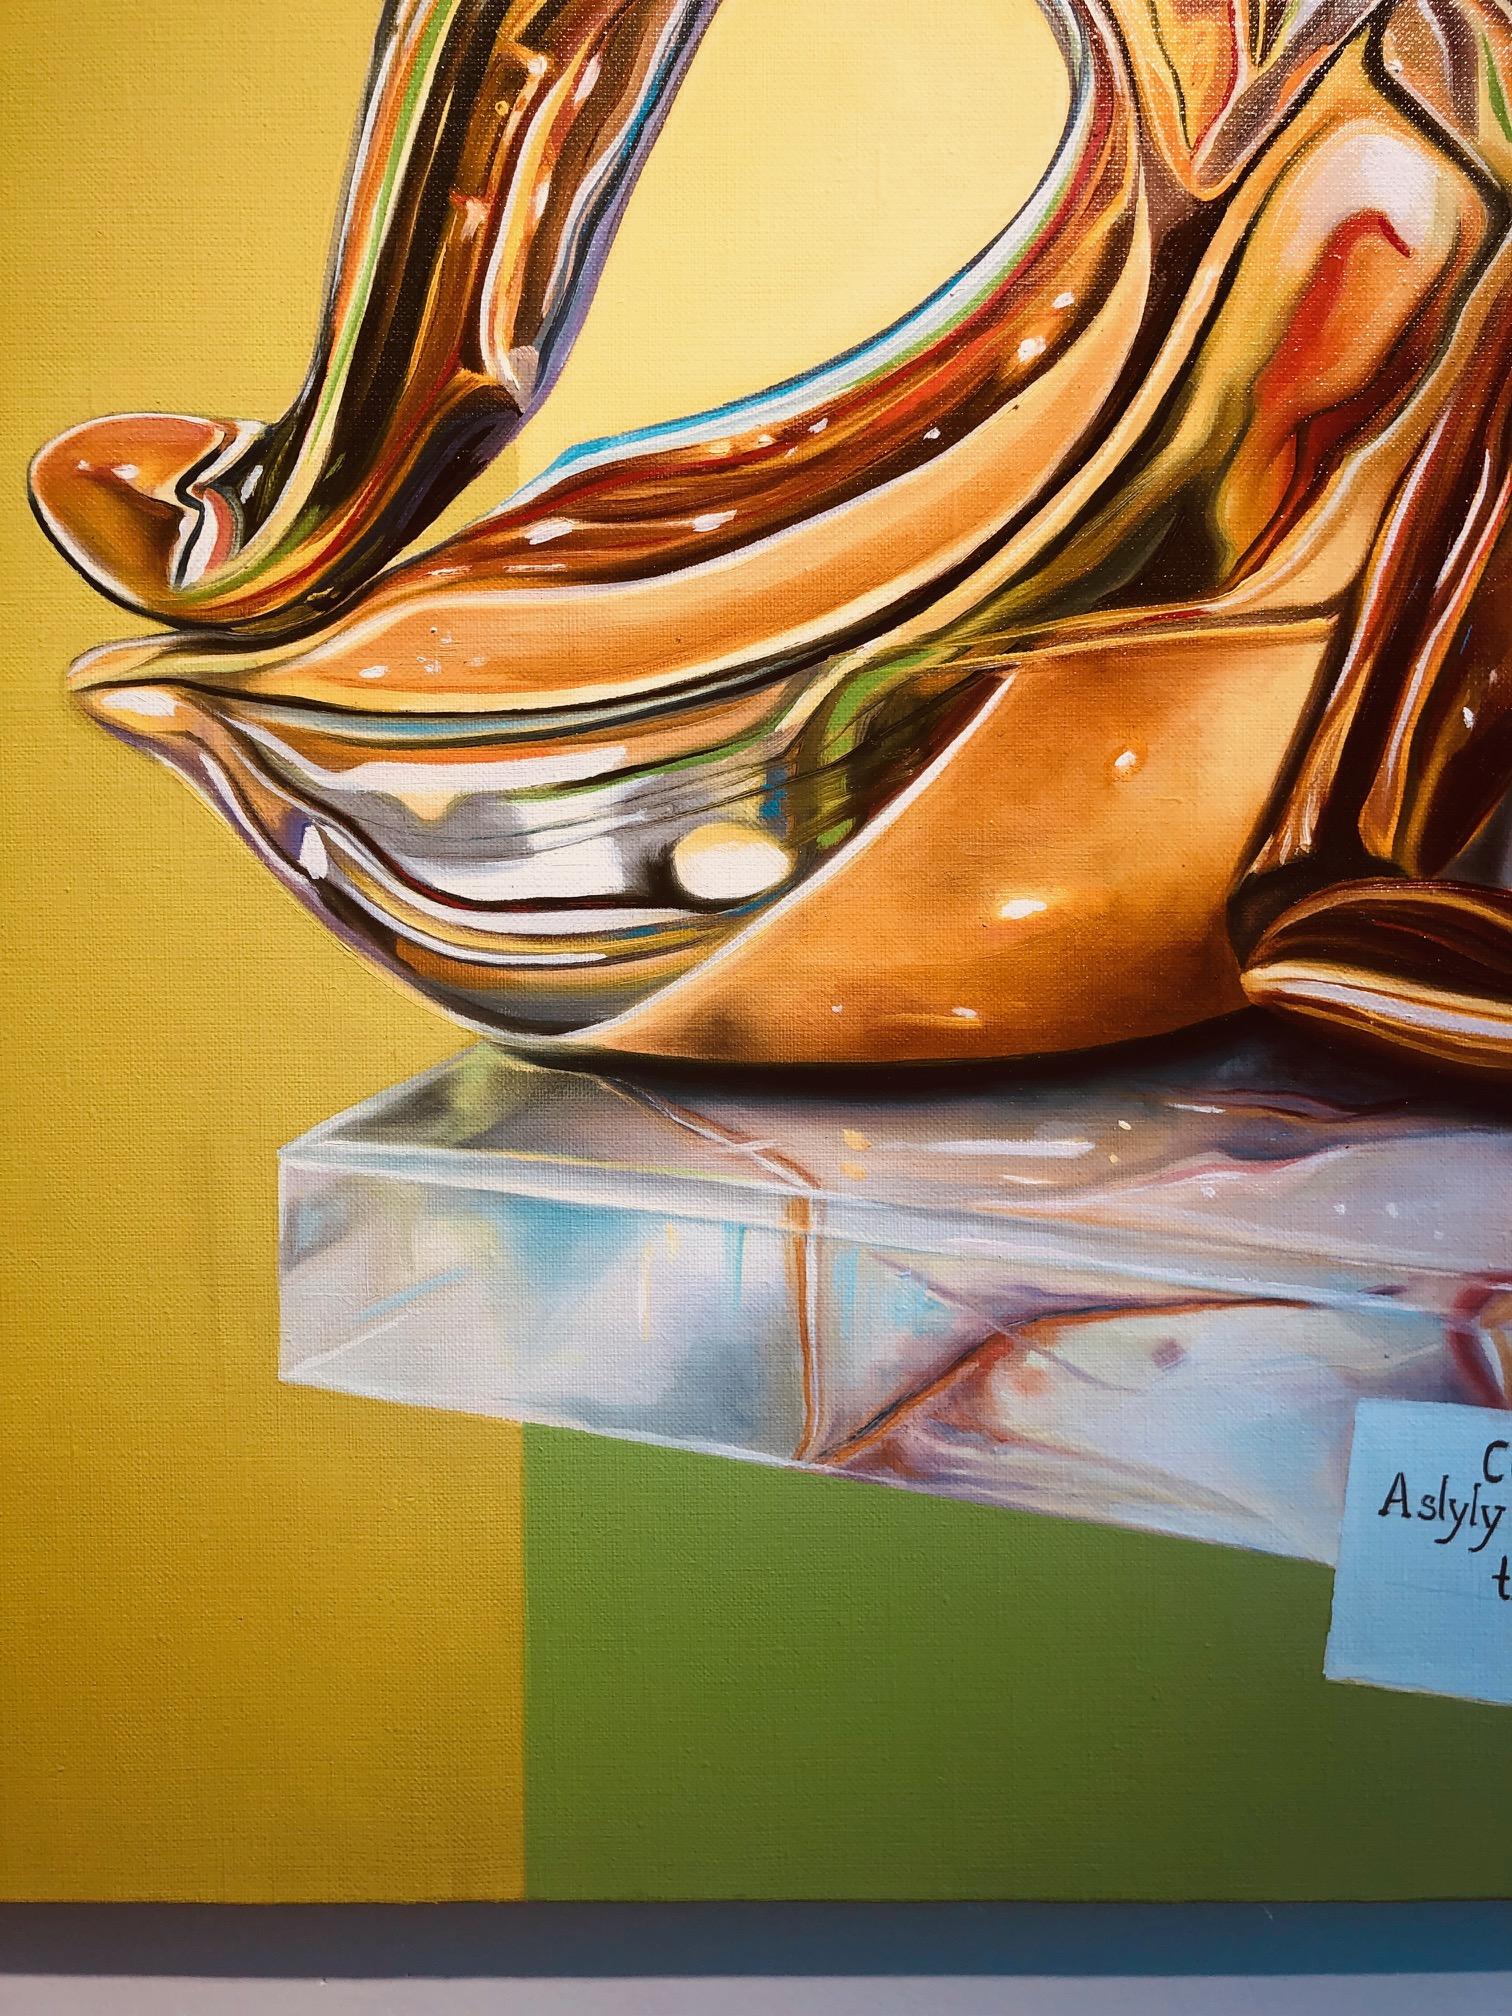 Color Field Banana, oil on linen painting, depicts a golden sculpture of a banana from artist Justyna Kisielewicz, whose elaborate, vibrant and full of zest paintings reflect her life experiences and her observations of the world around her.  A